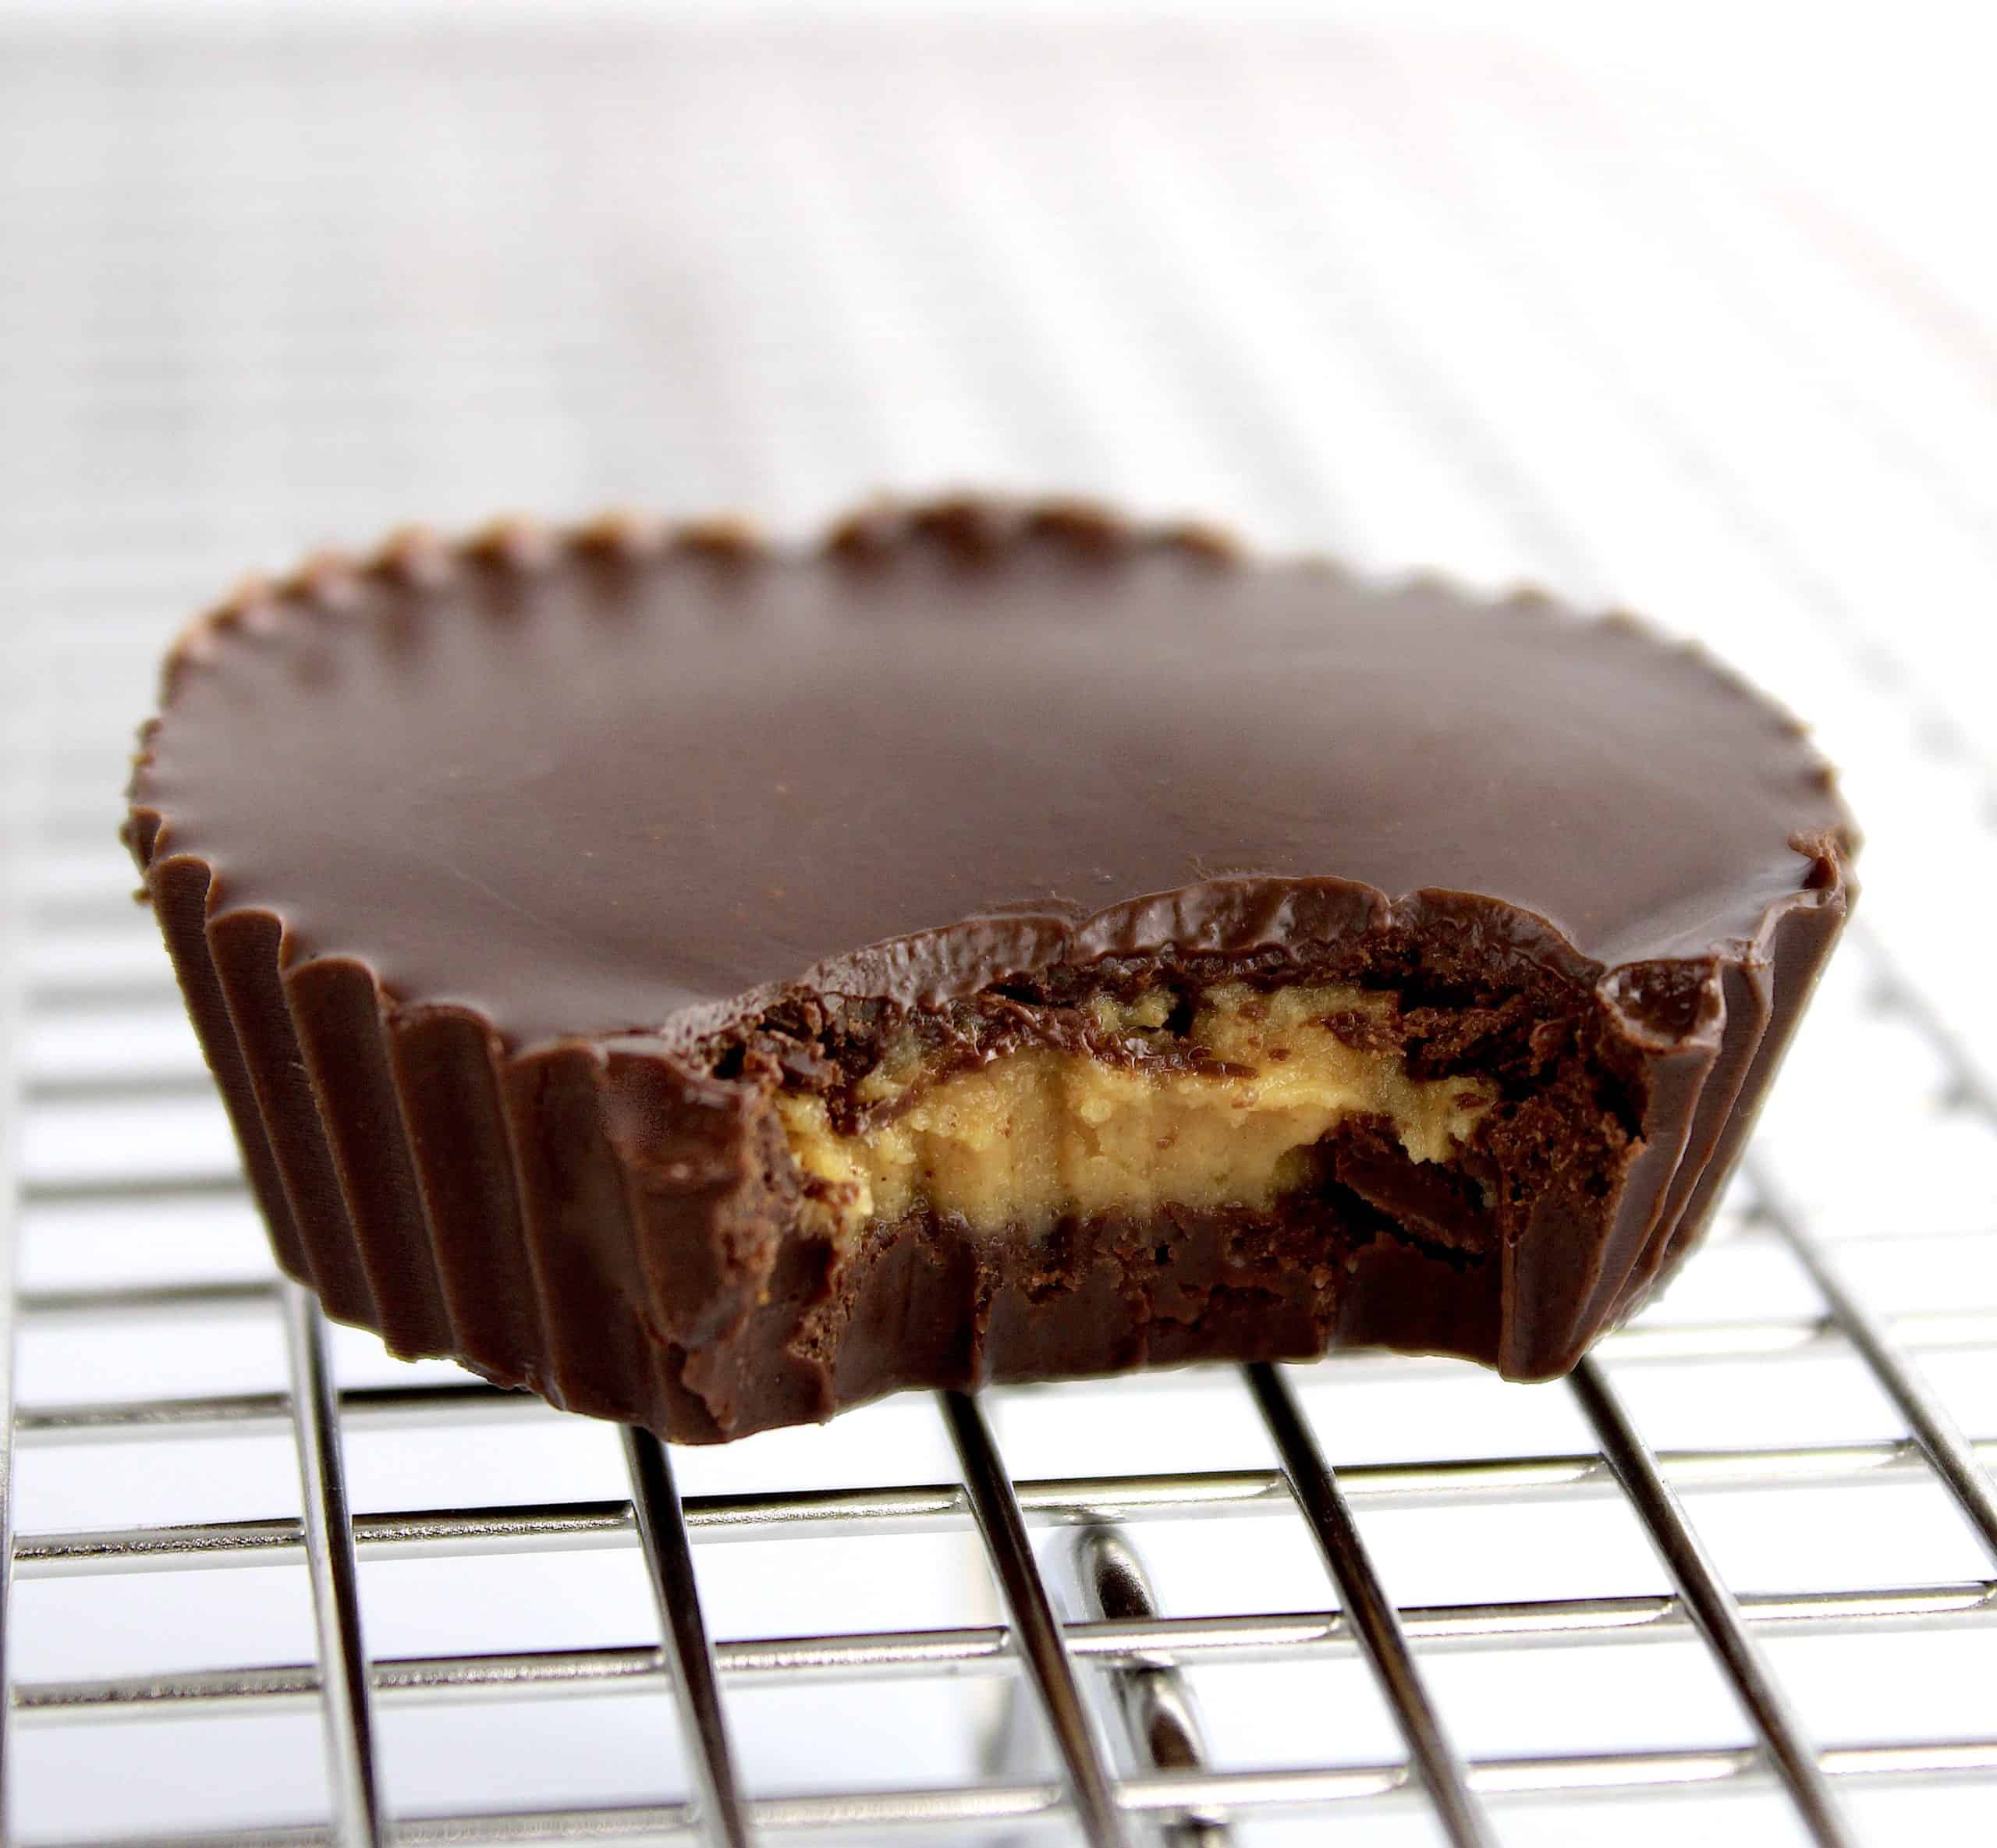 Keto Peanut Butter Cup closeup with bite missing